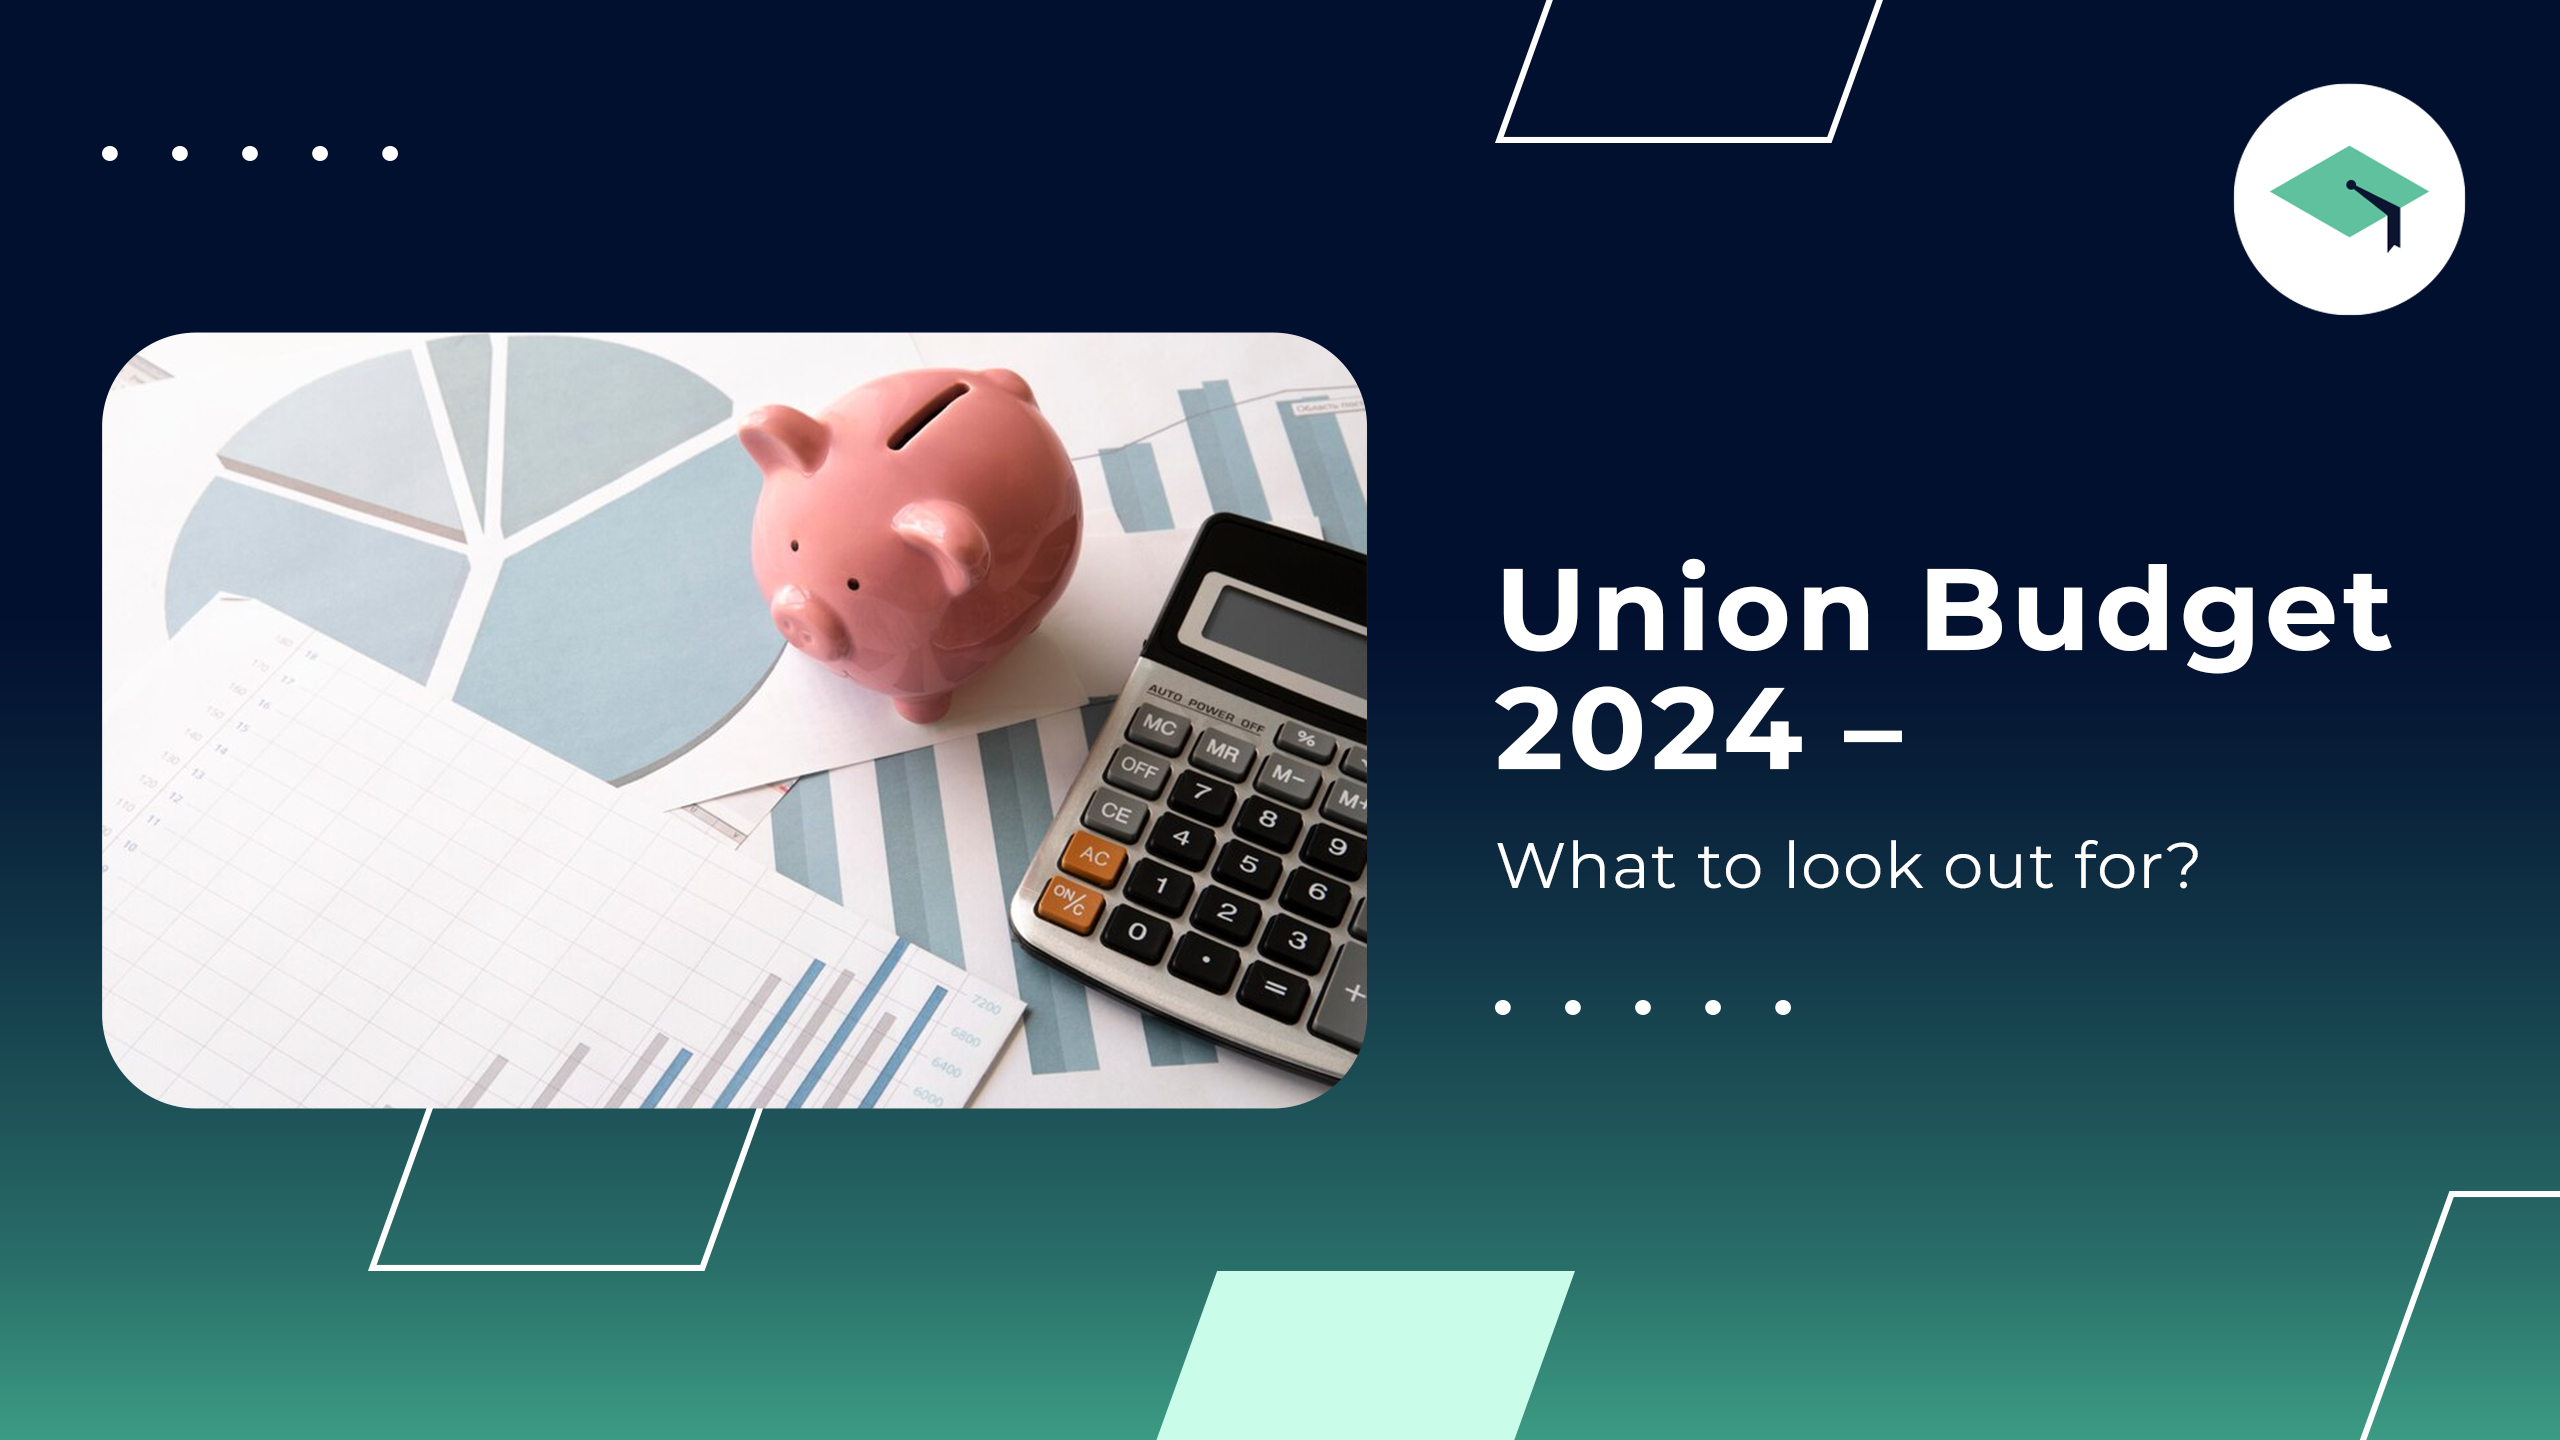 Union Budget 2024 – What to look out for?